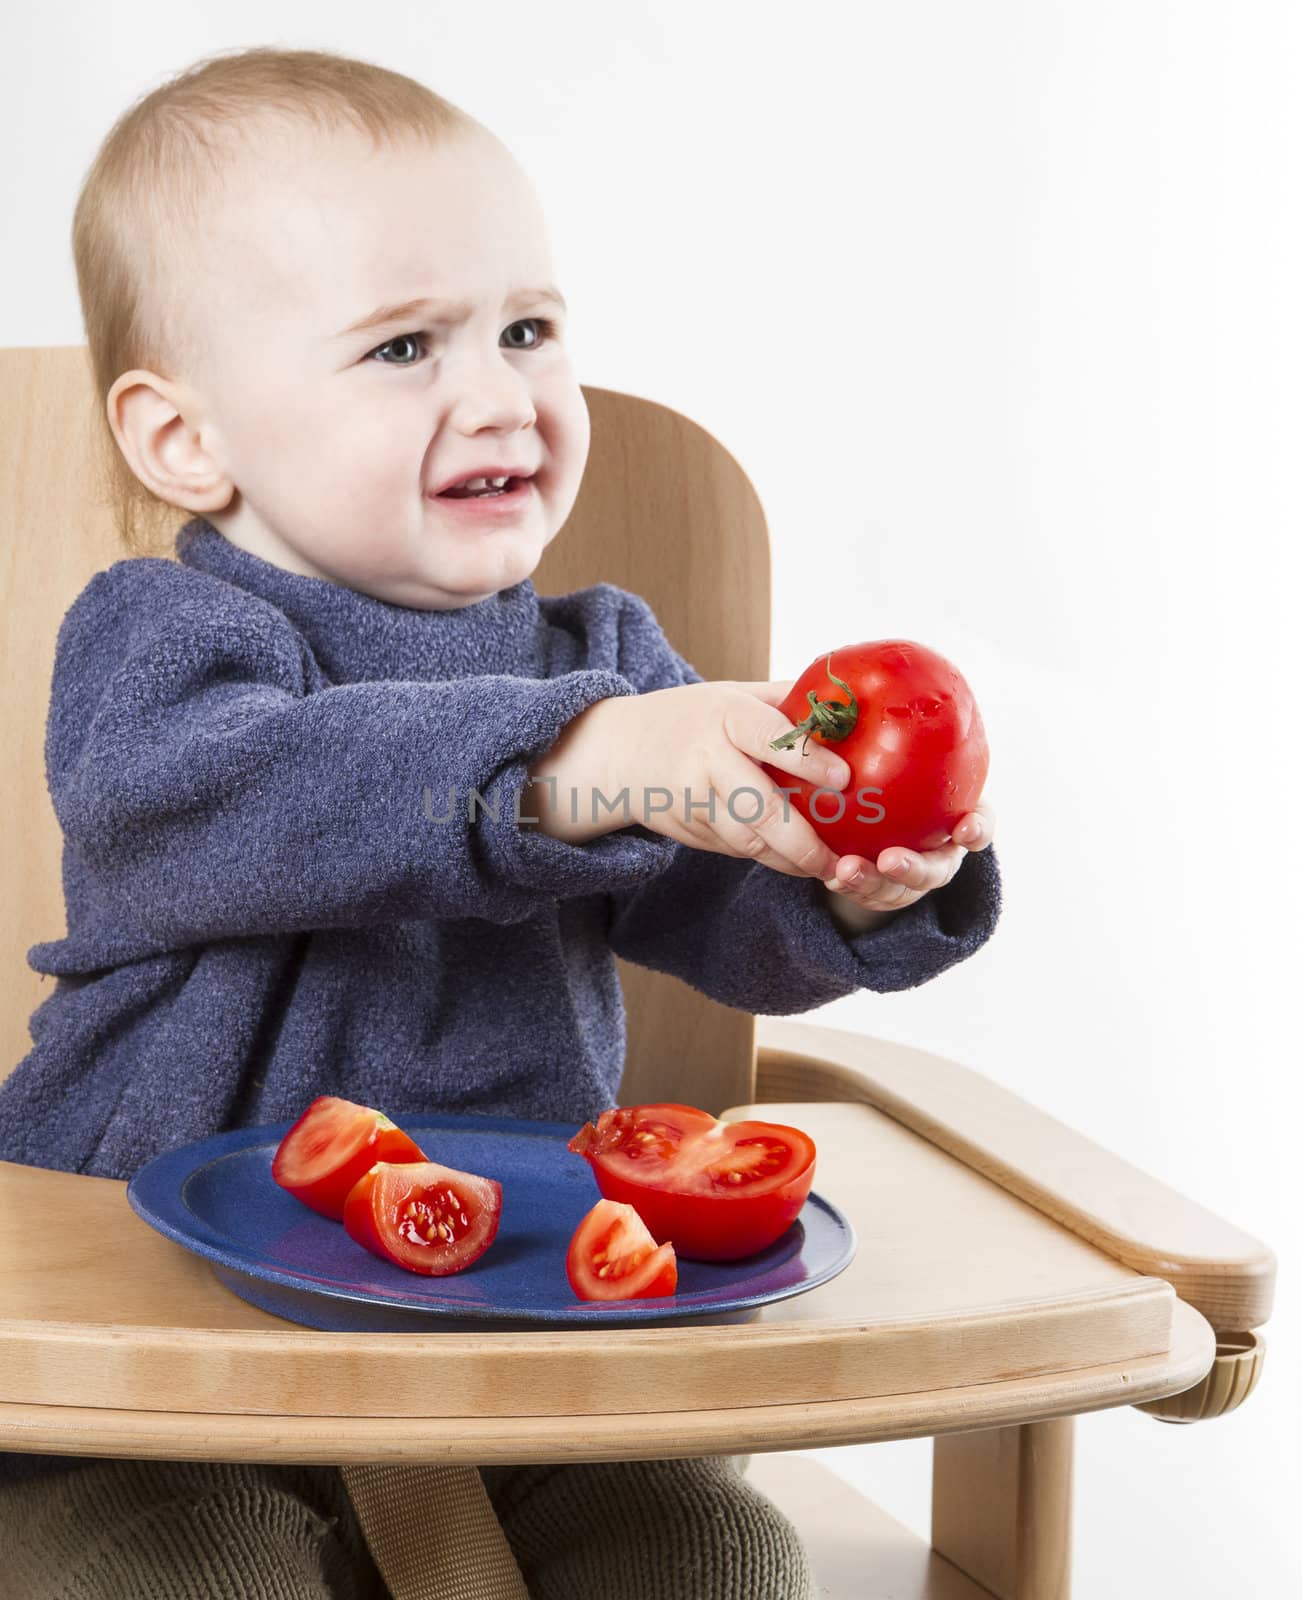 young child eating tomatoes in high chair by gewoldi